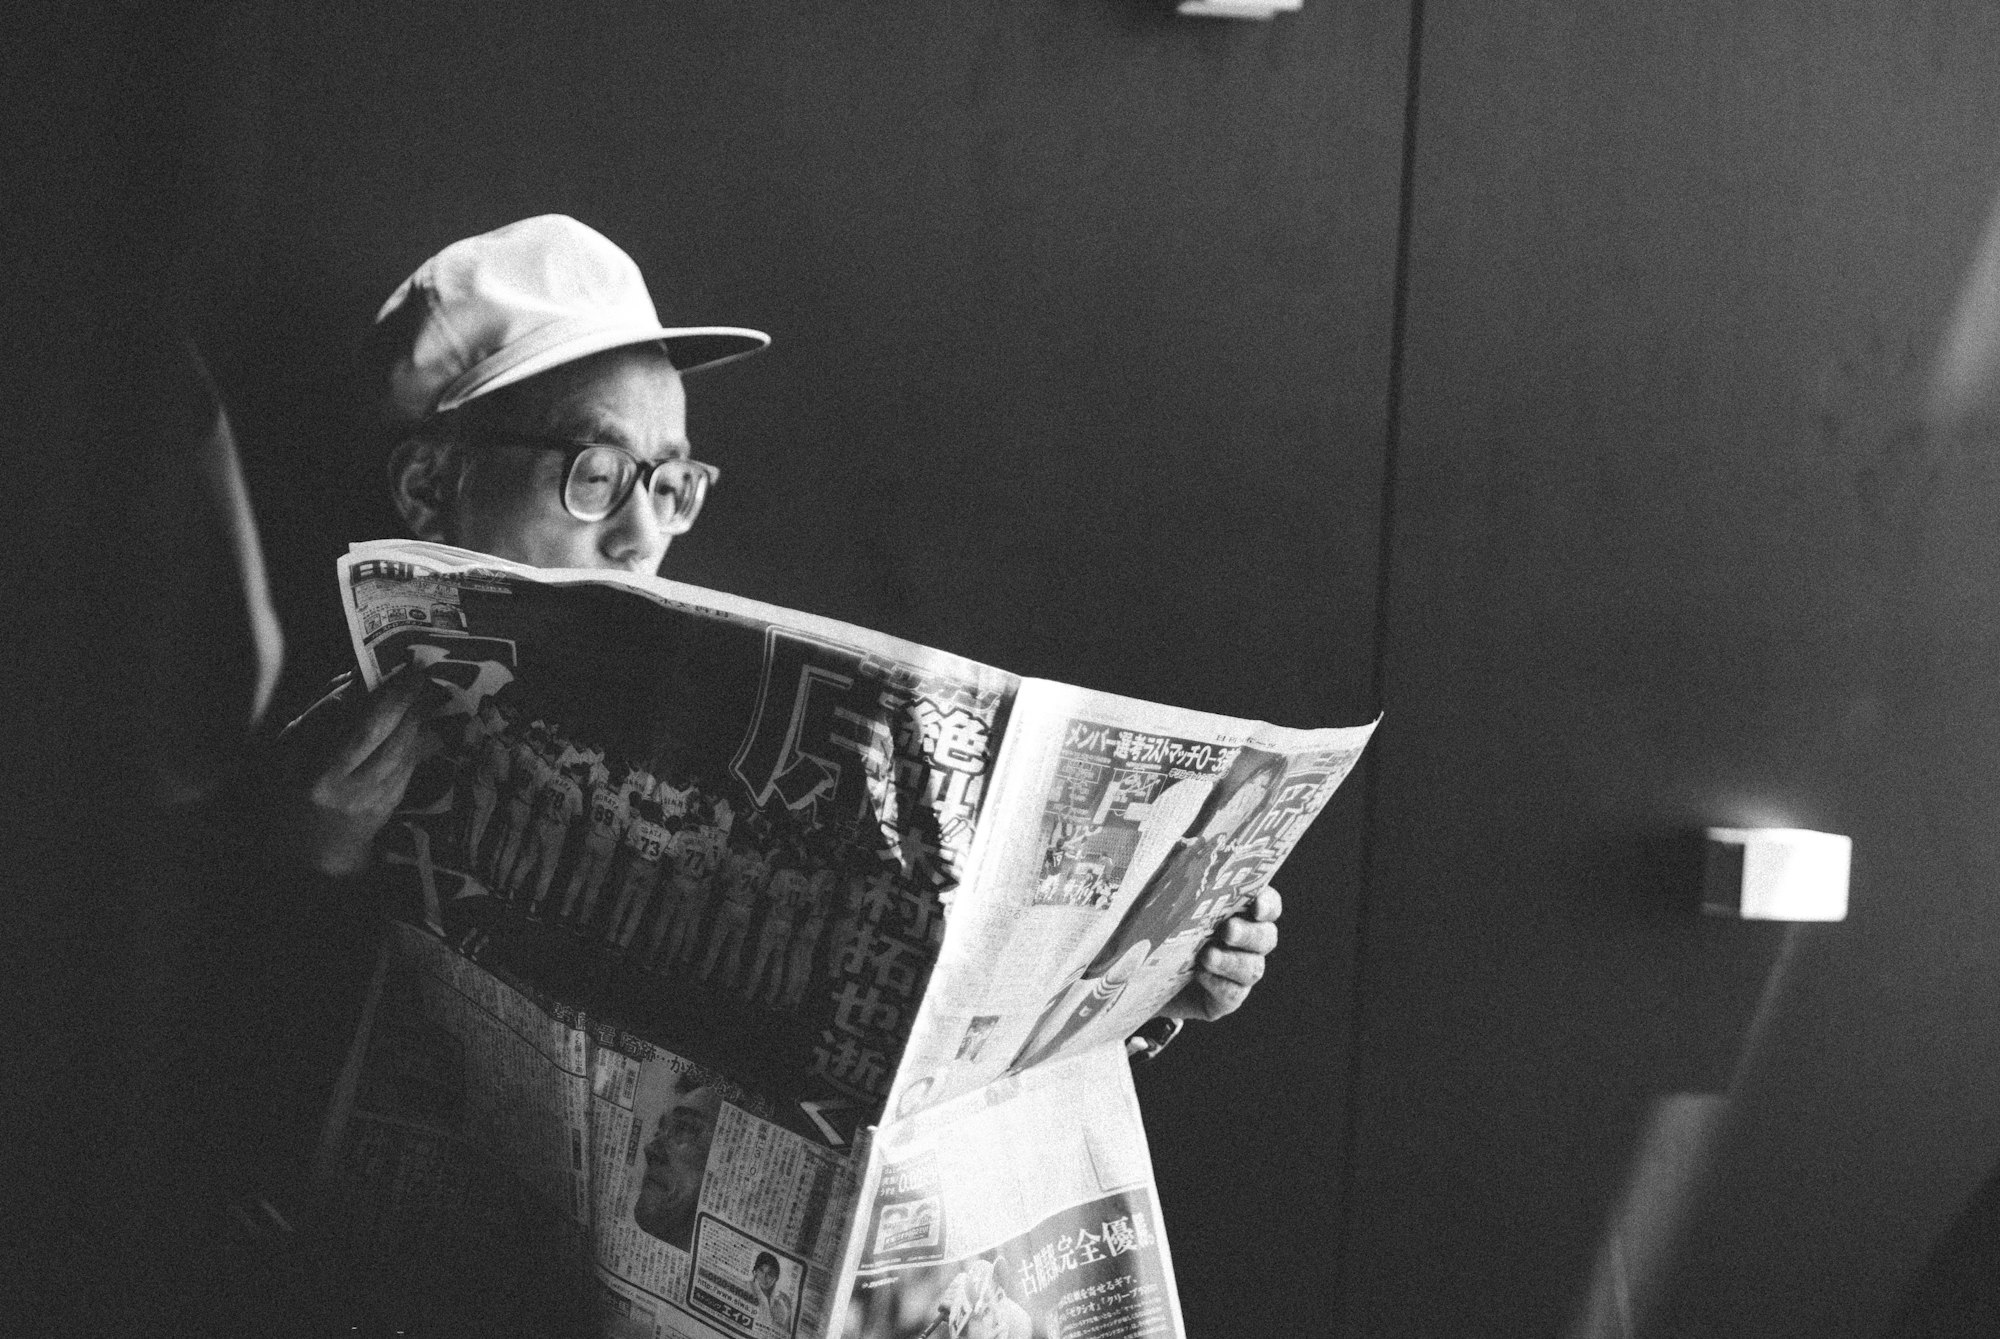 Black and white image of a man with a hat and glasses reading a newspaper